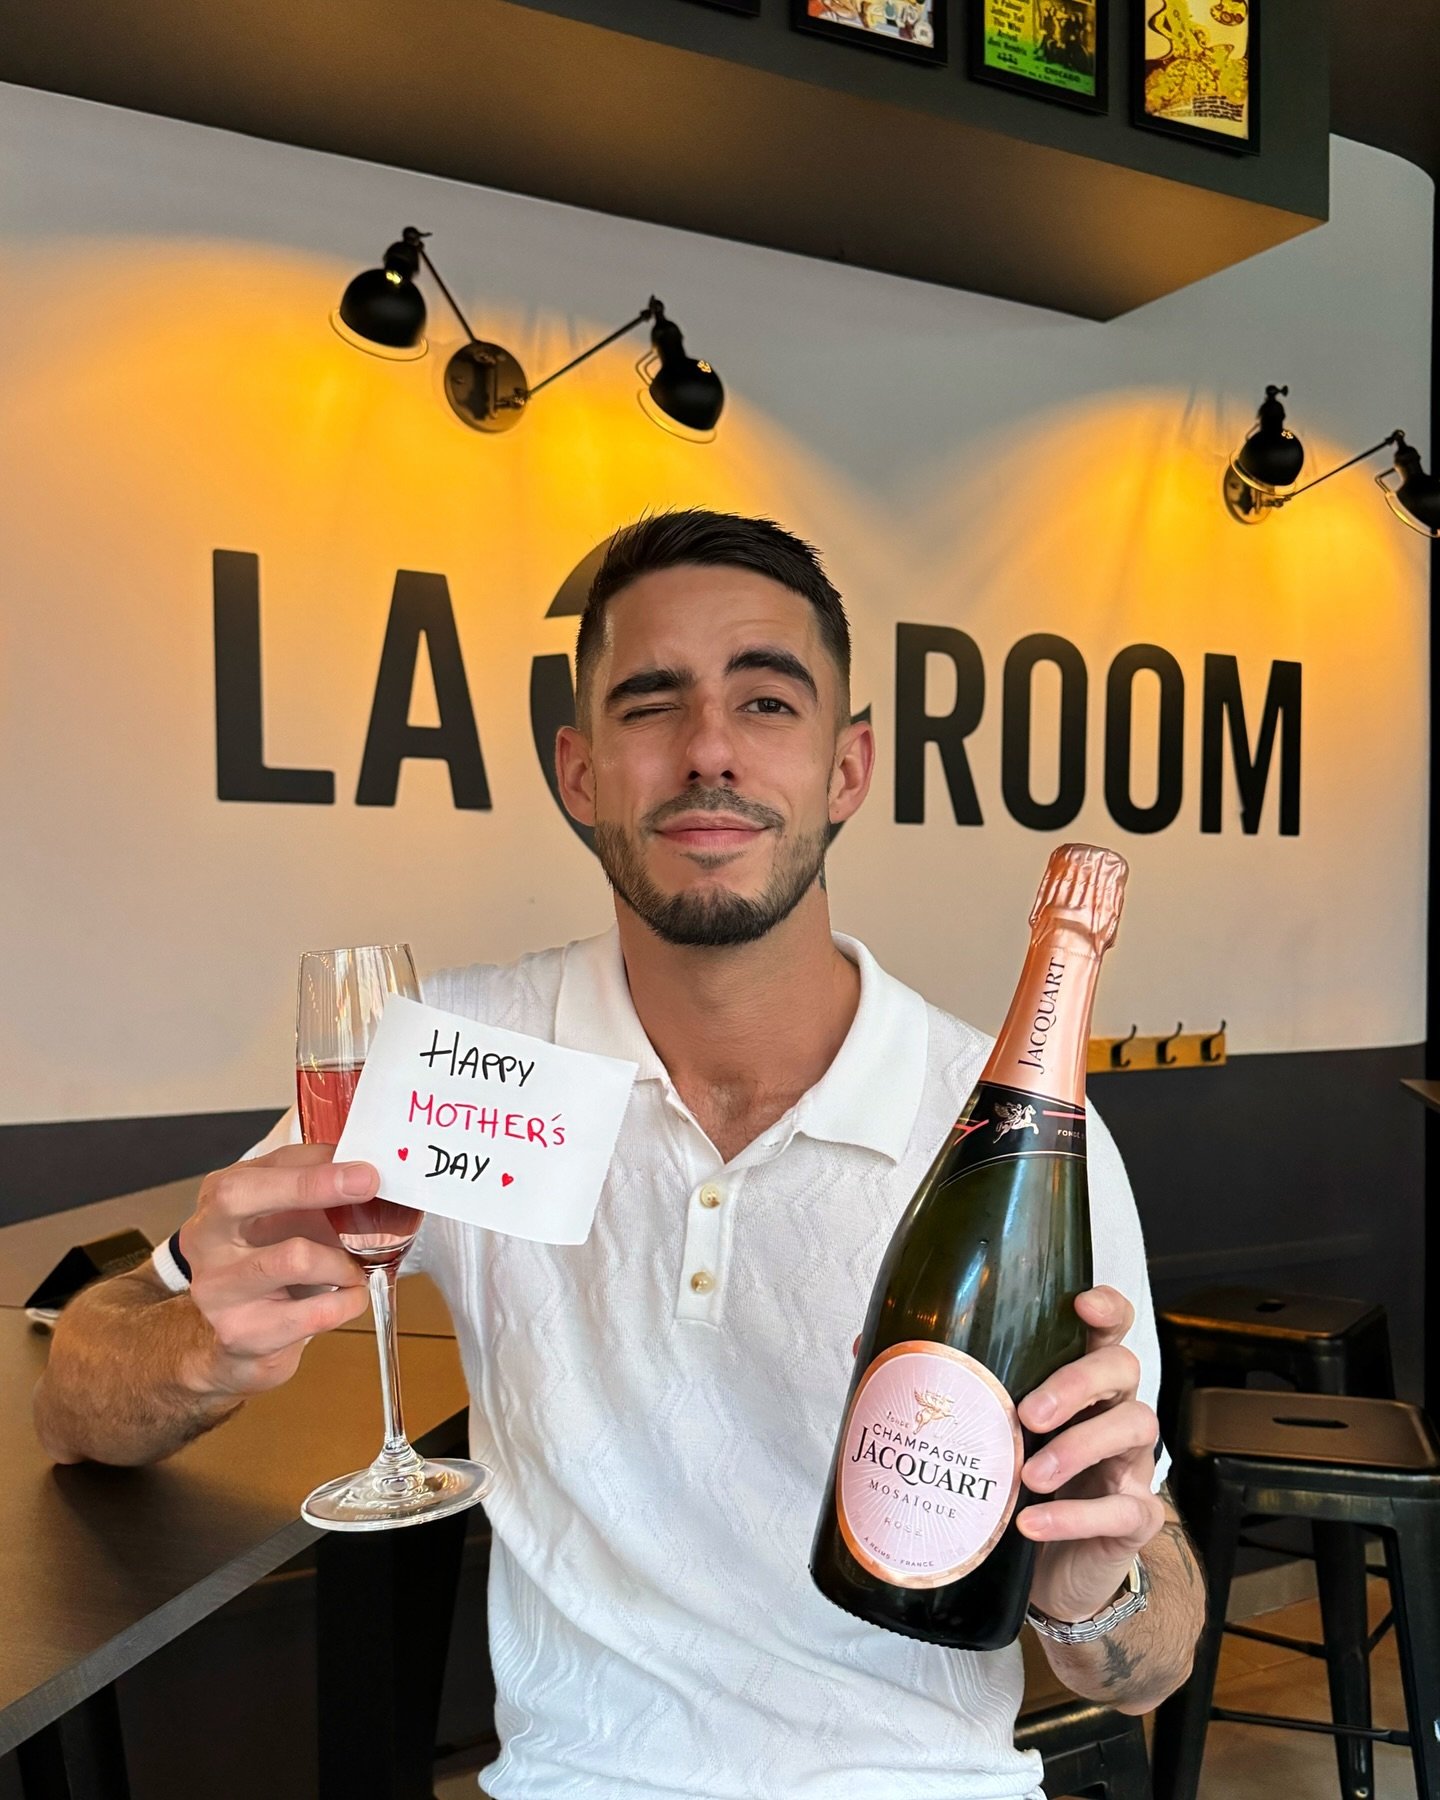 The taproom team wish a marvellous Mother&rsquo;s Day for all mummy&rsquo;s❤️🌹

For the occasion we got ros&eacute; champagne, if you don&rsquo;t know what to do, bring your mum at La taproom to celebrate with bubbly love 🫧💘

📍Rue des Grottes 13,